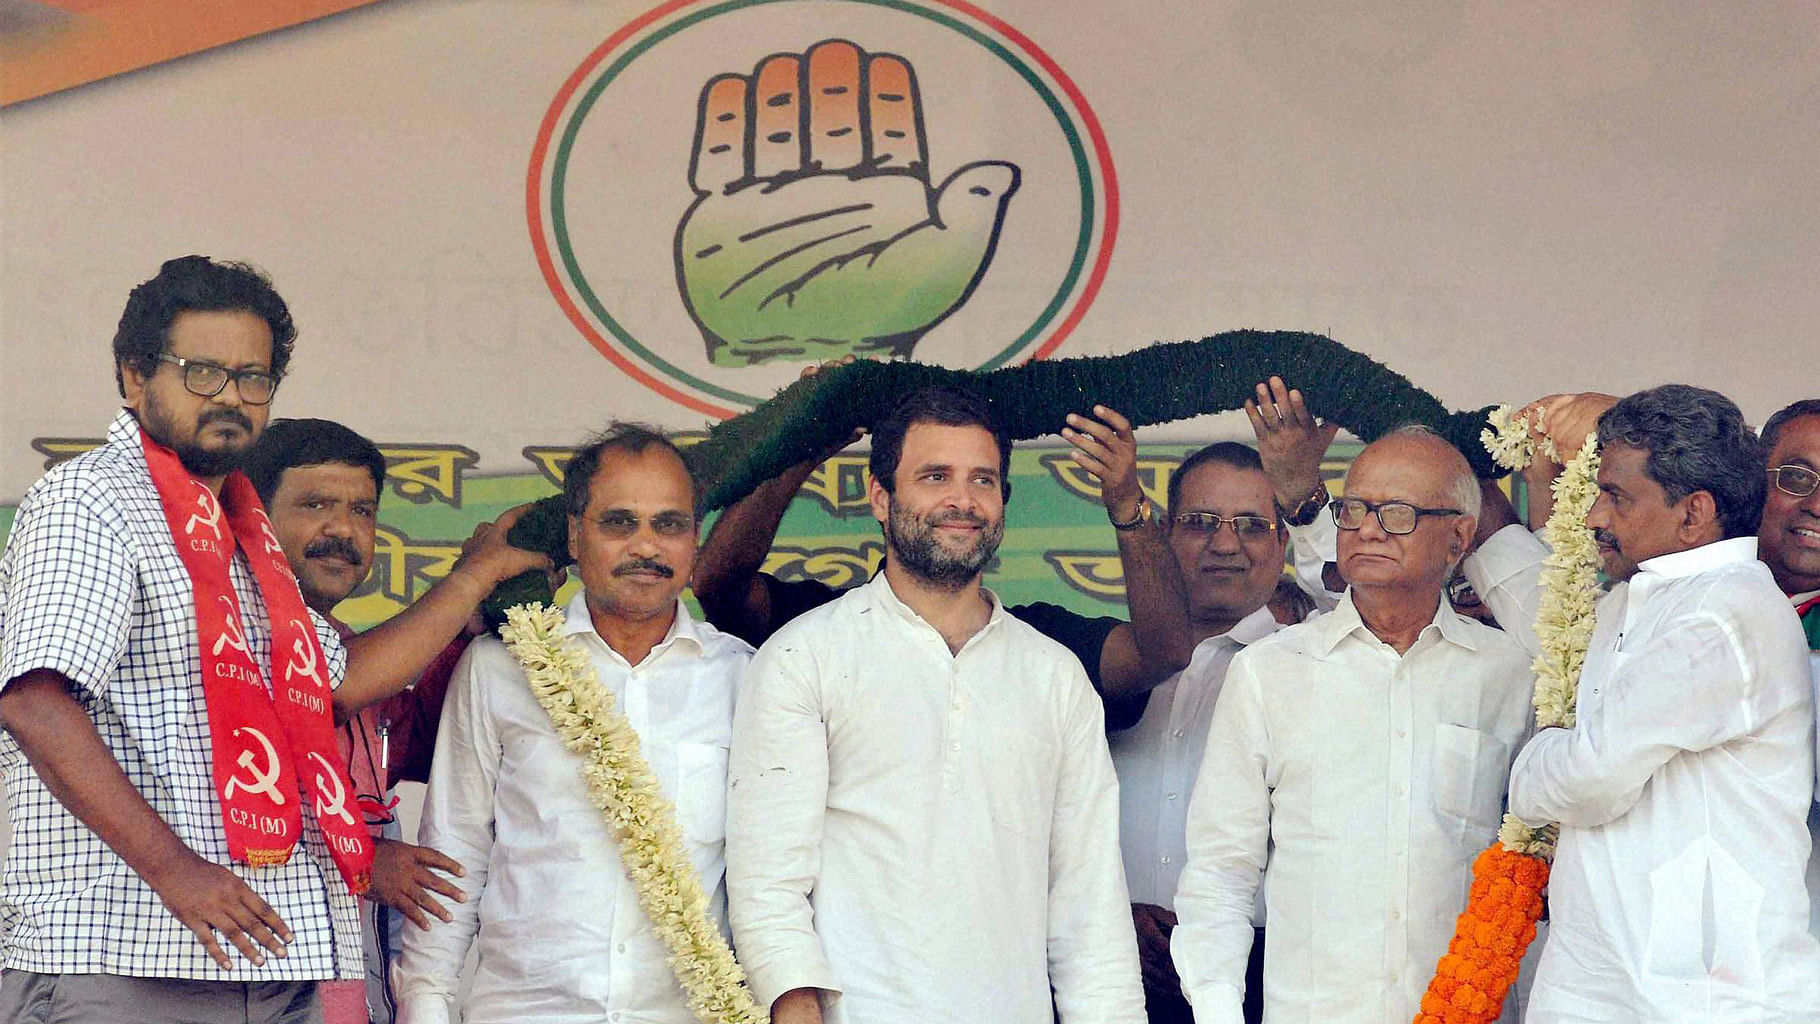 Congress Vice-President Rahul Gandhi being garlanded by CPI(M)-Congress joint candidates Anjan Bera (L) and Santosh Pathak (R)  during an election campaign rally in Howrah on Saturday. To Rahul’s left is West Bengal Congress chief and Lok Sabha MP Adhir Ranjan Chowdhury. (Photo: PTI)